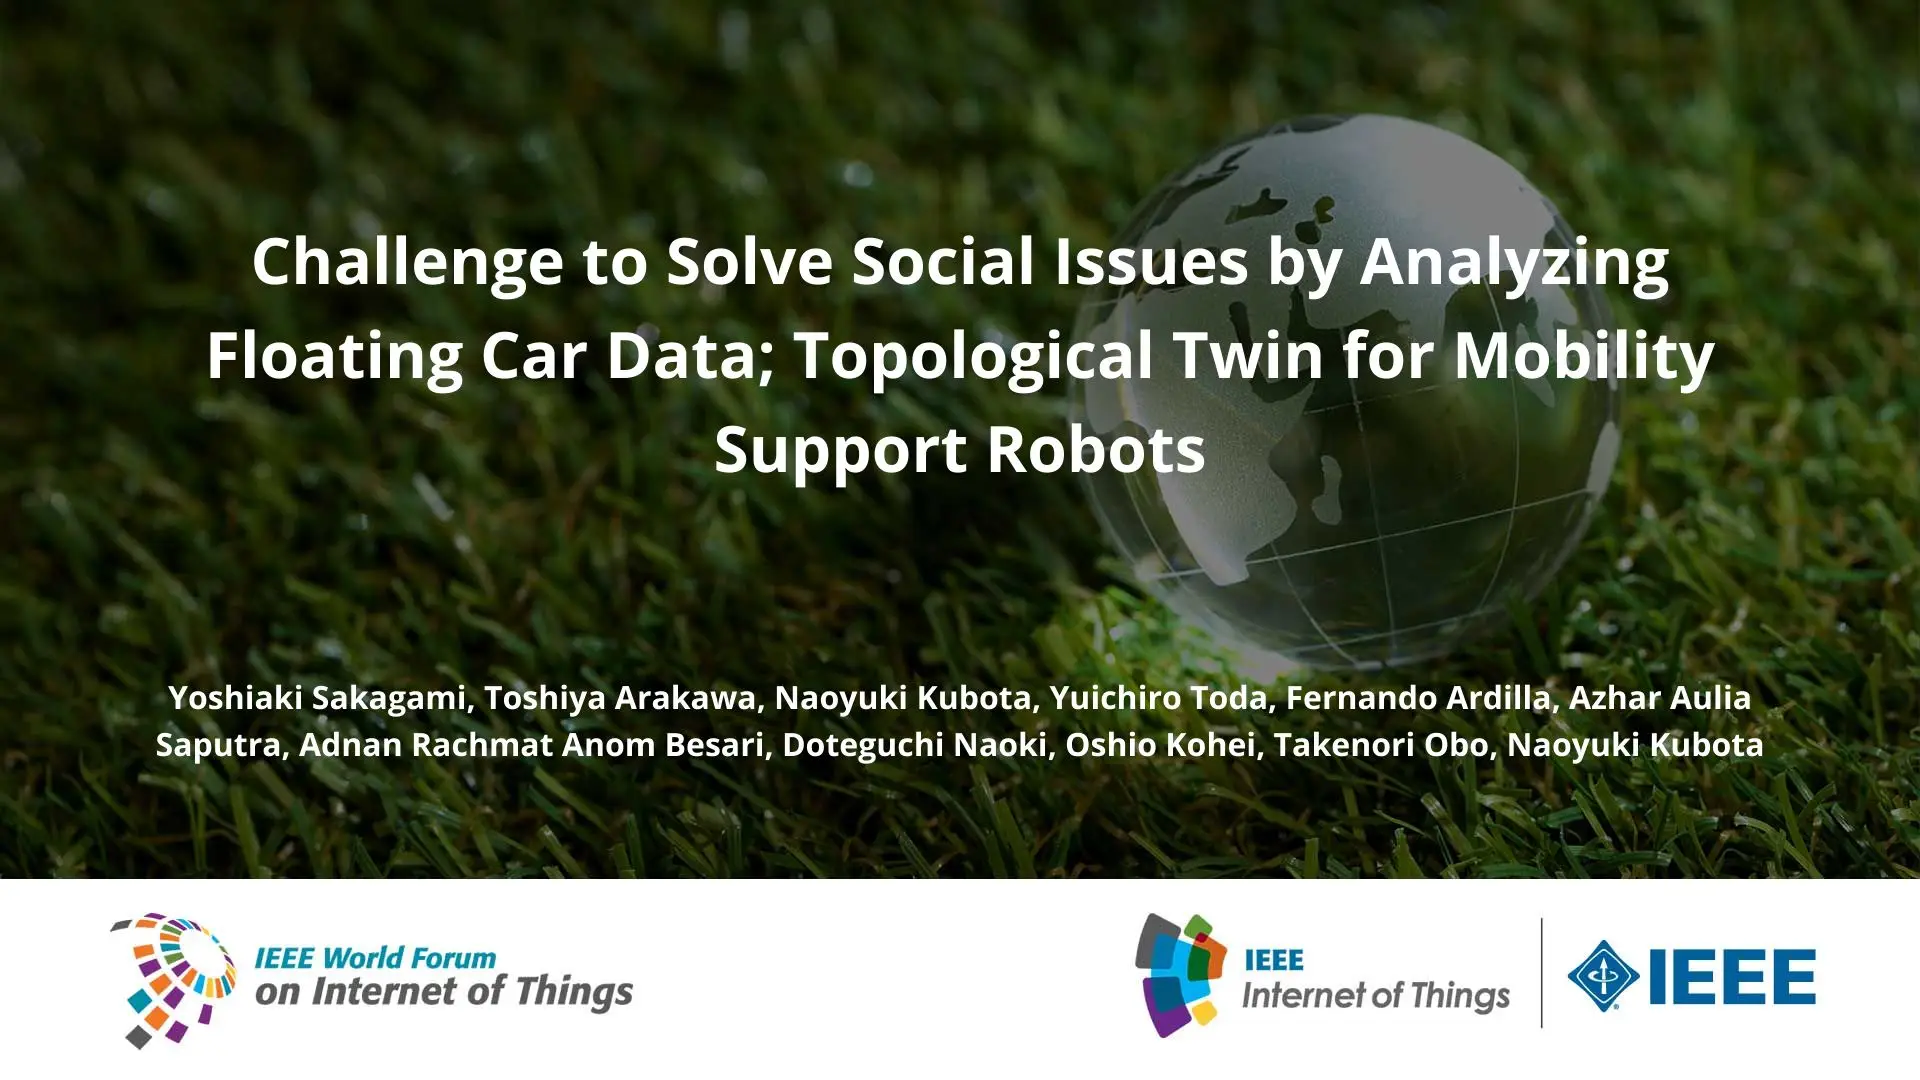 Challenge to Solve Social Issues by Analyzing Floating Car Data; Topological Twin for Mobility Support Robots